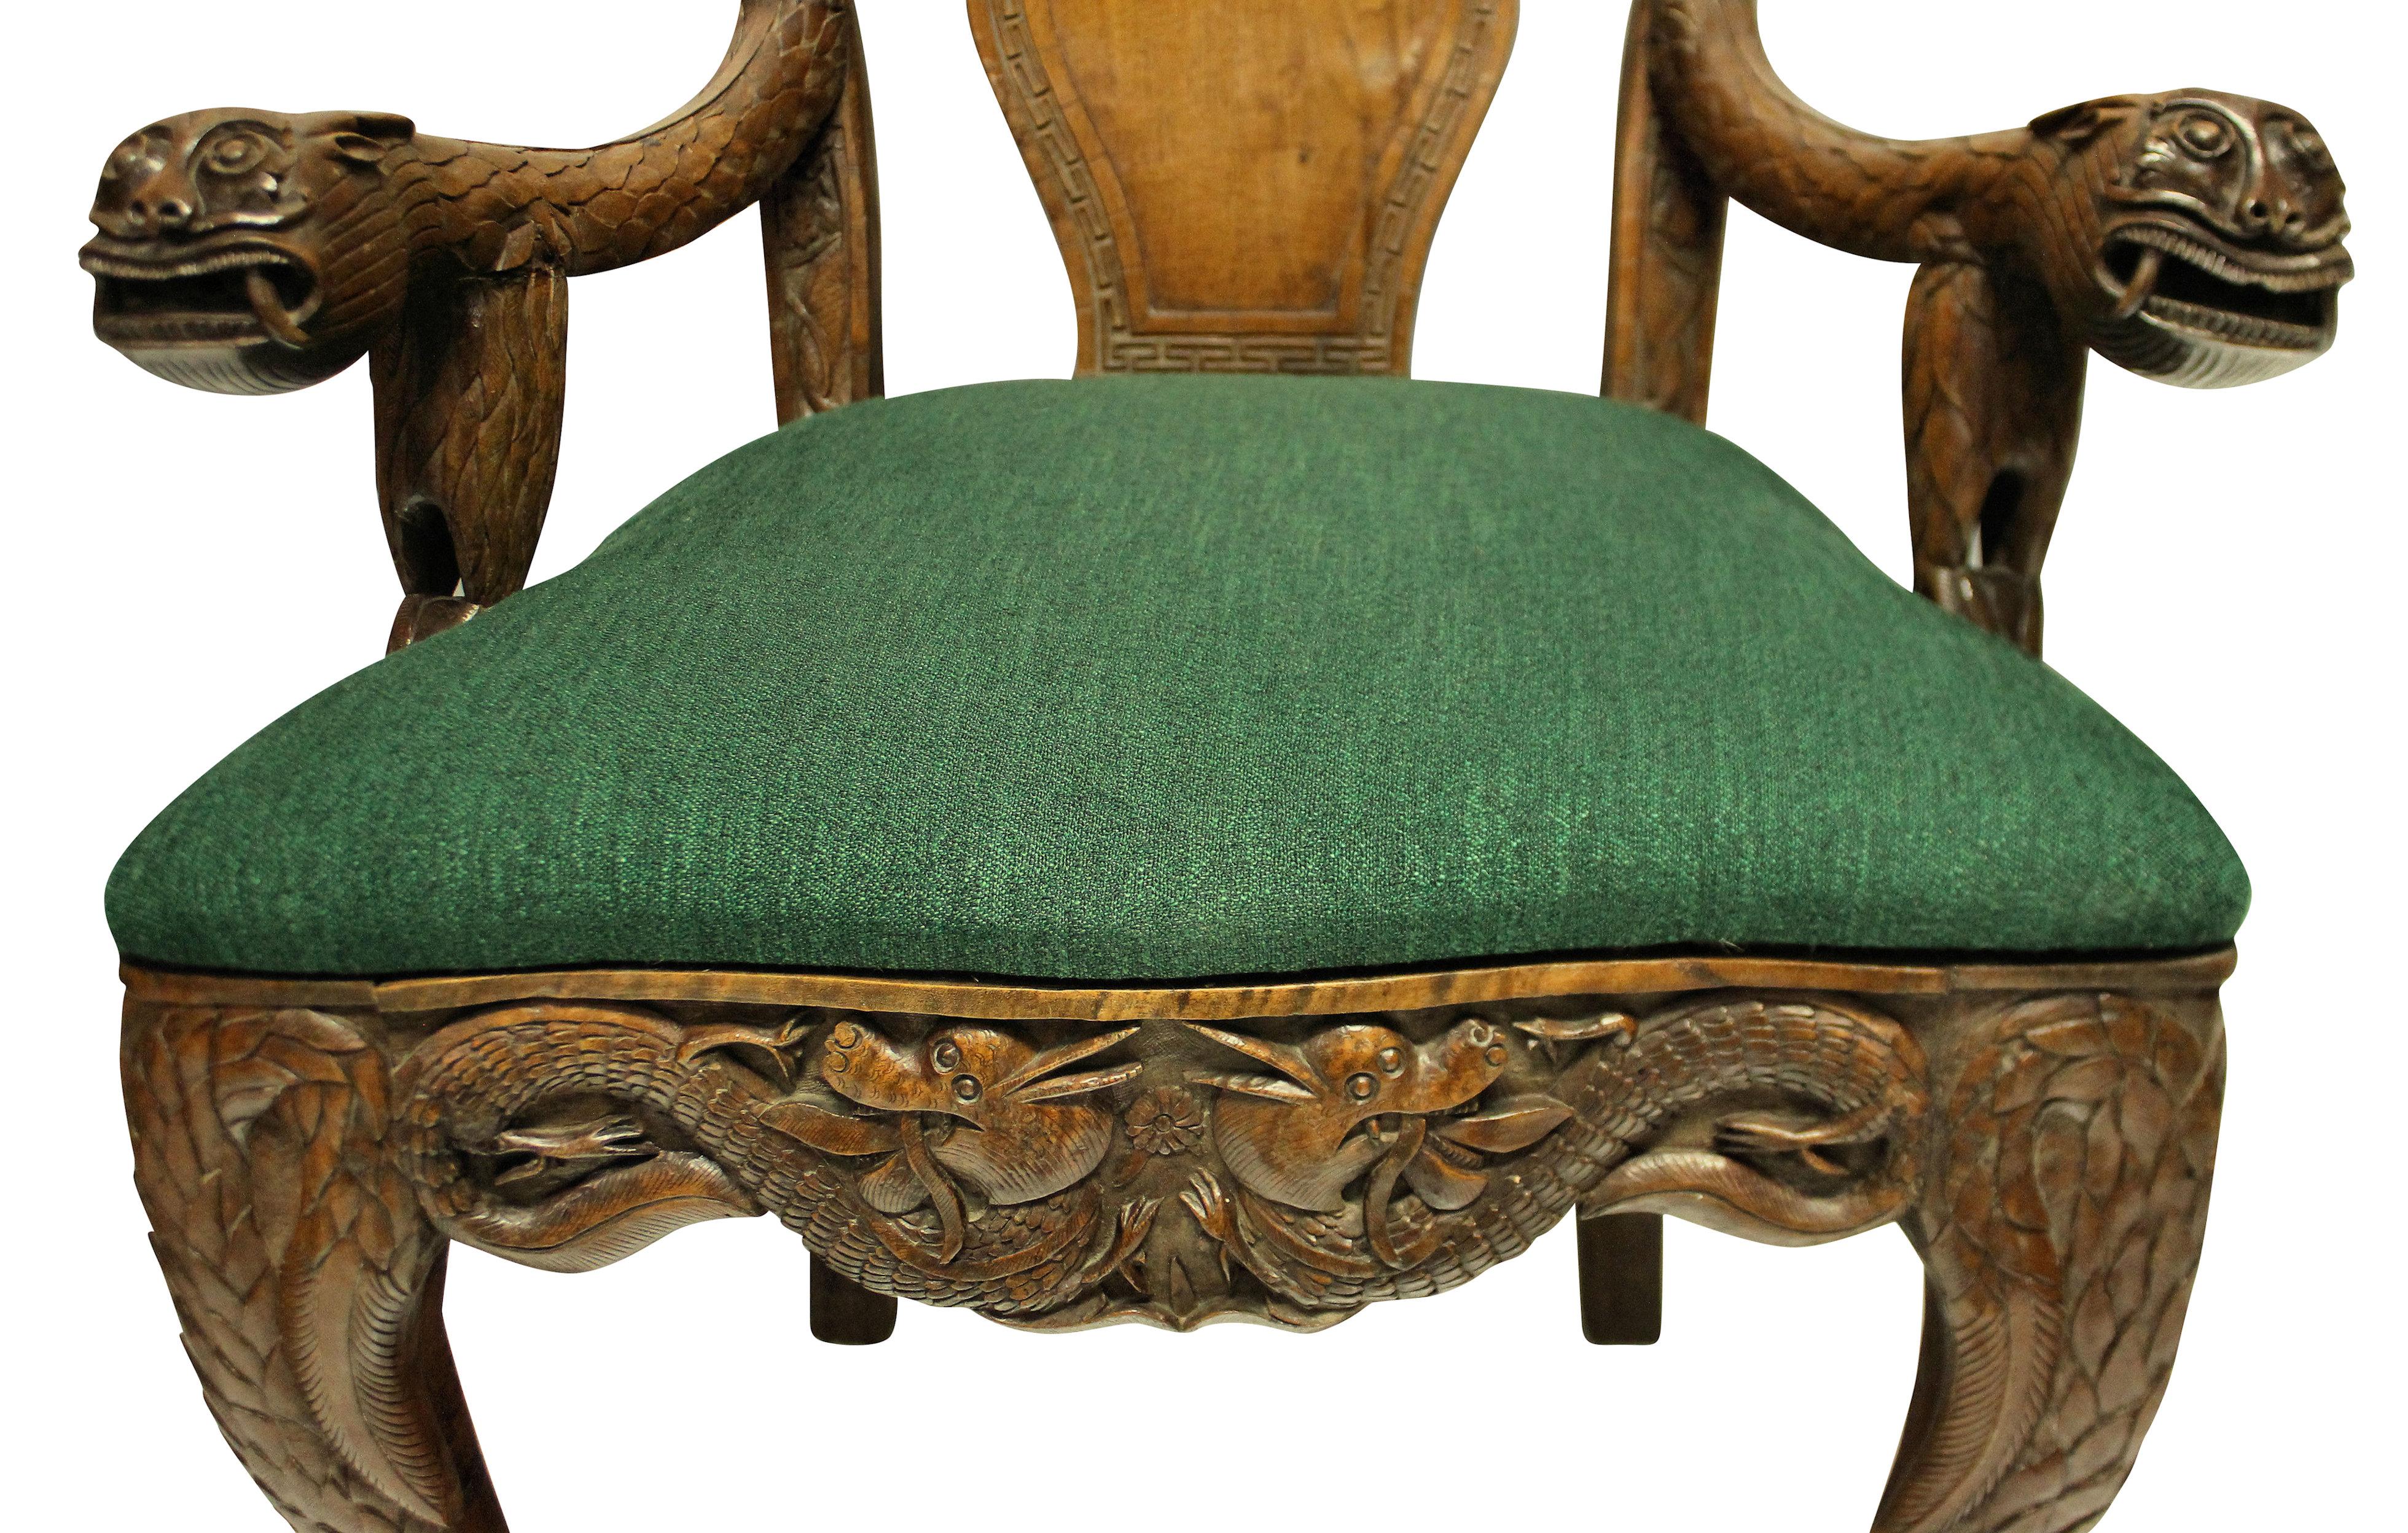 A pair of finely carved, highly decorative Chinese armchairs in solid teak. The chairs are full of symbolism and meaning, with lions, dragons, bats, lotus flowers and symbols. With seats newly upholstered in emerald green.